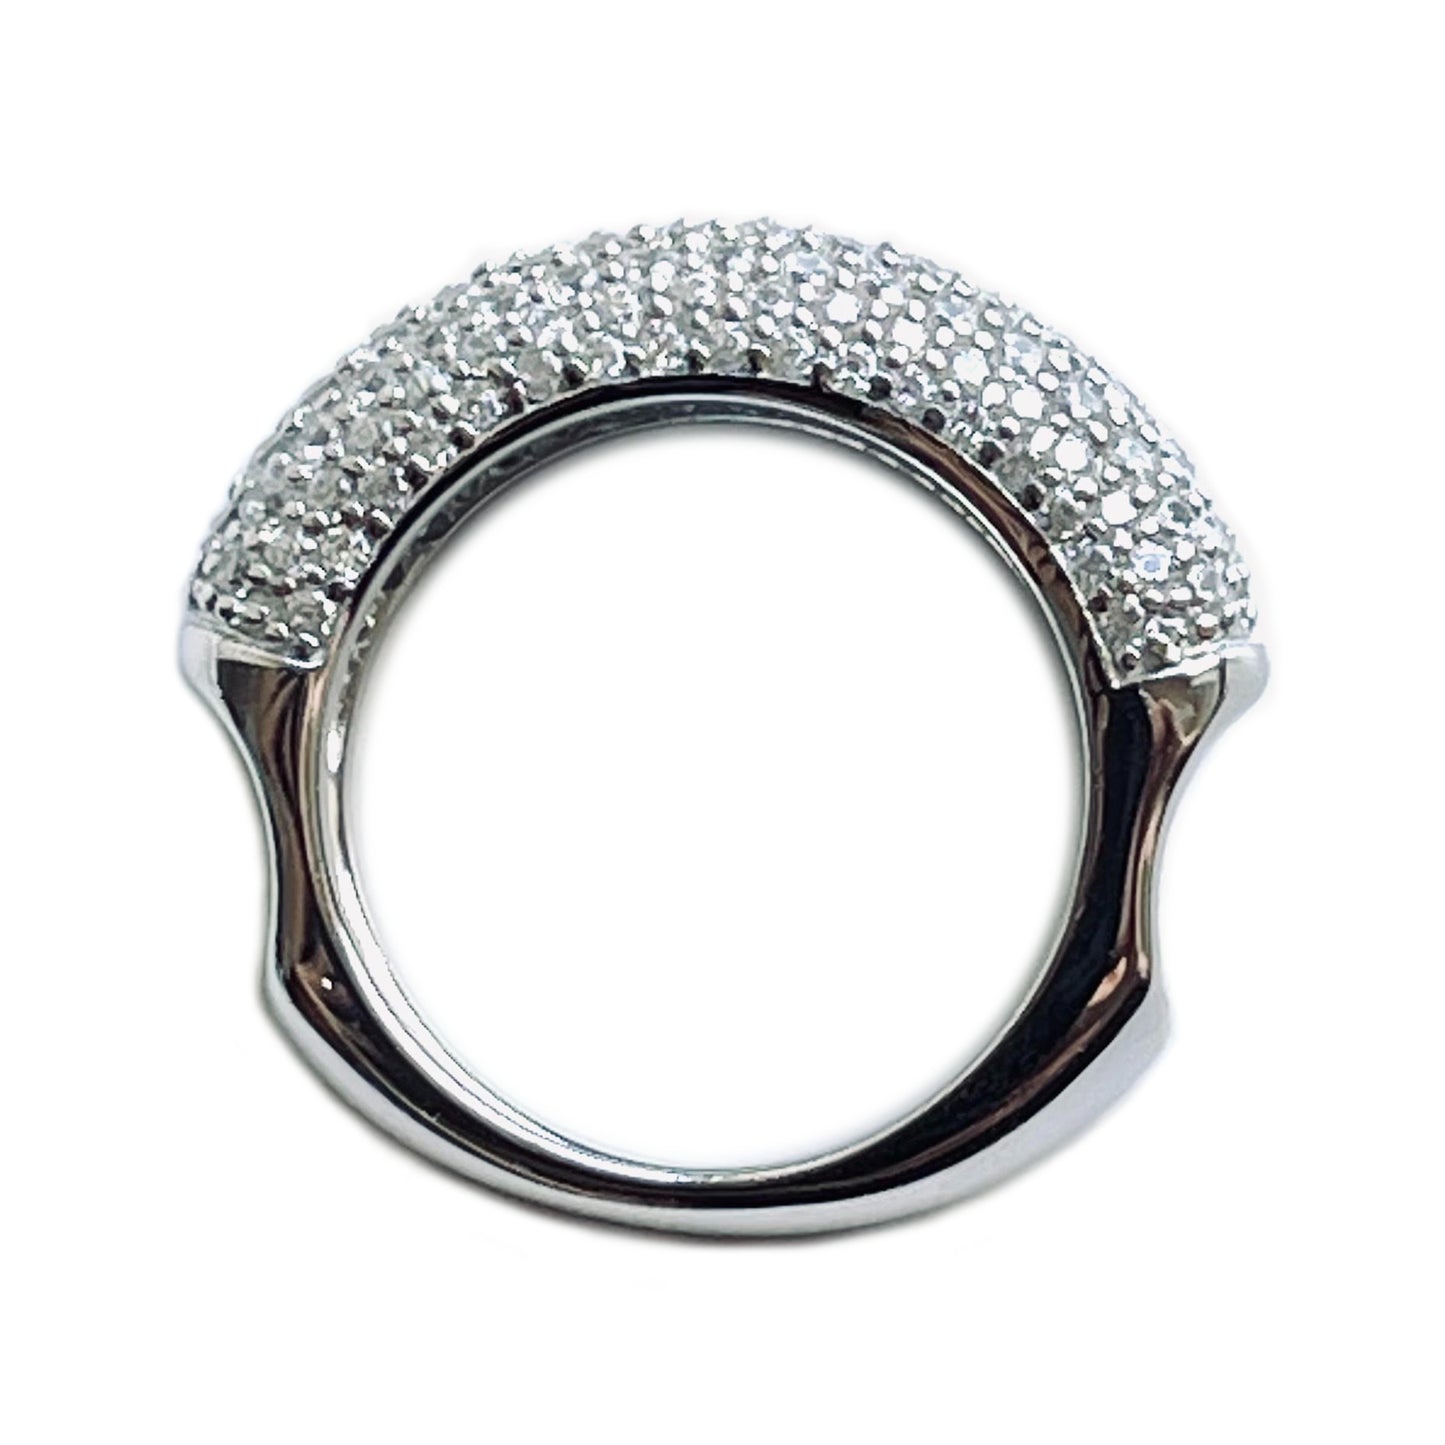 Glamorous Divine Palmi Ring made of 925 sterling silver with micro pavé setting of cubic zirconia stones. Extreme bling. Shop rings & affordable luxury jewellery by Bellagio & Co. Worldwide shipping